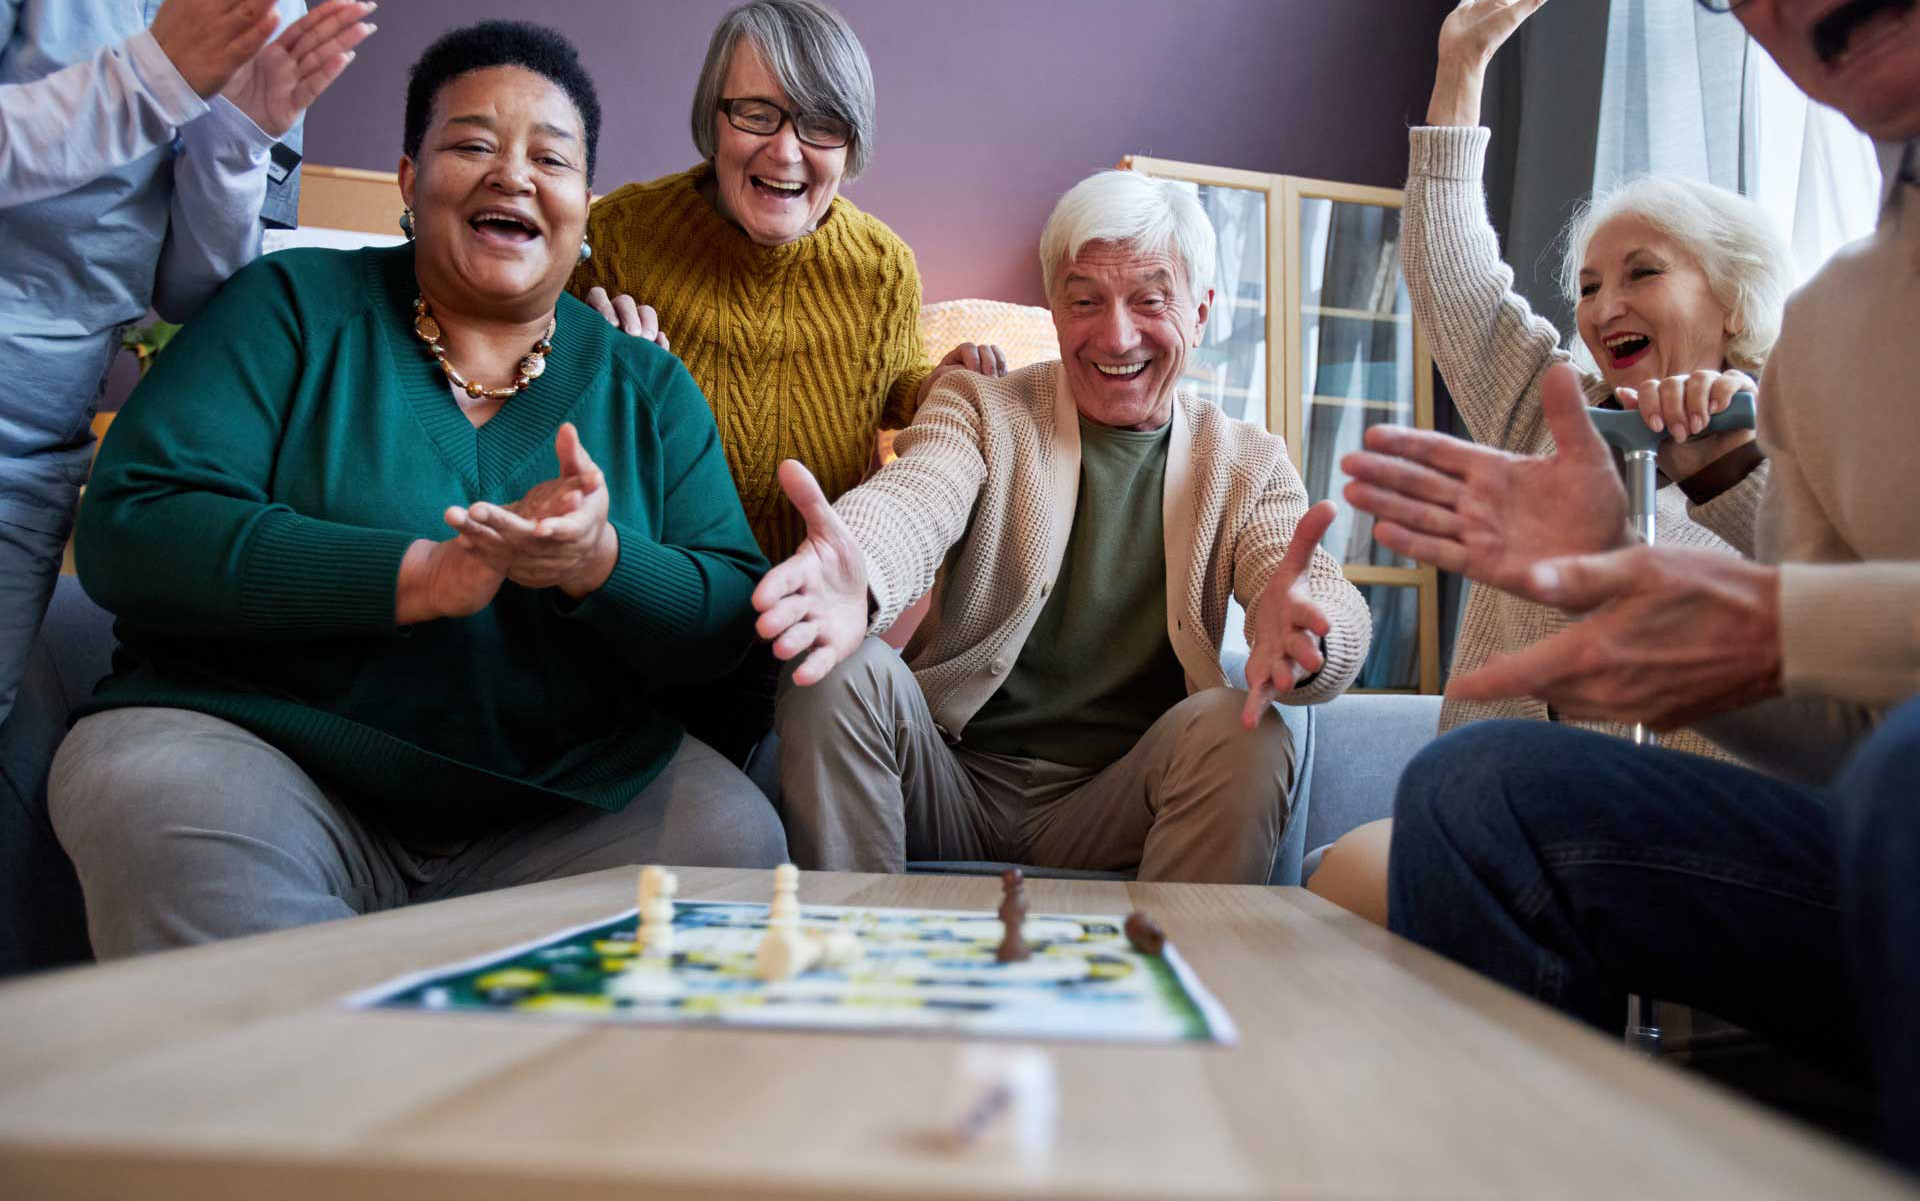 Residents playing a board game together